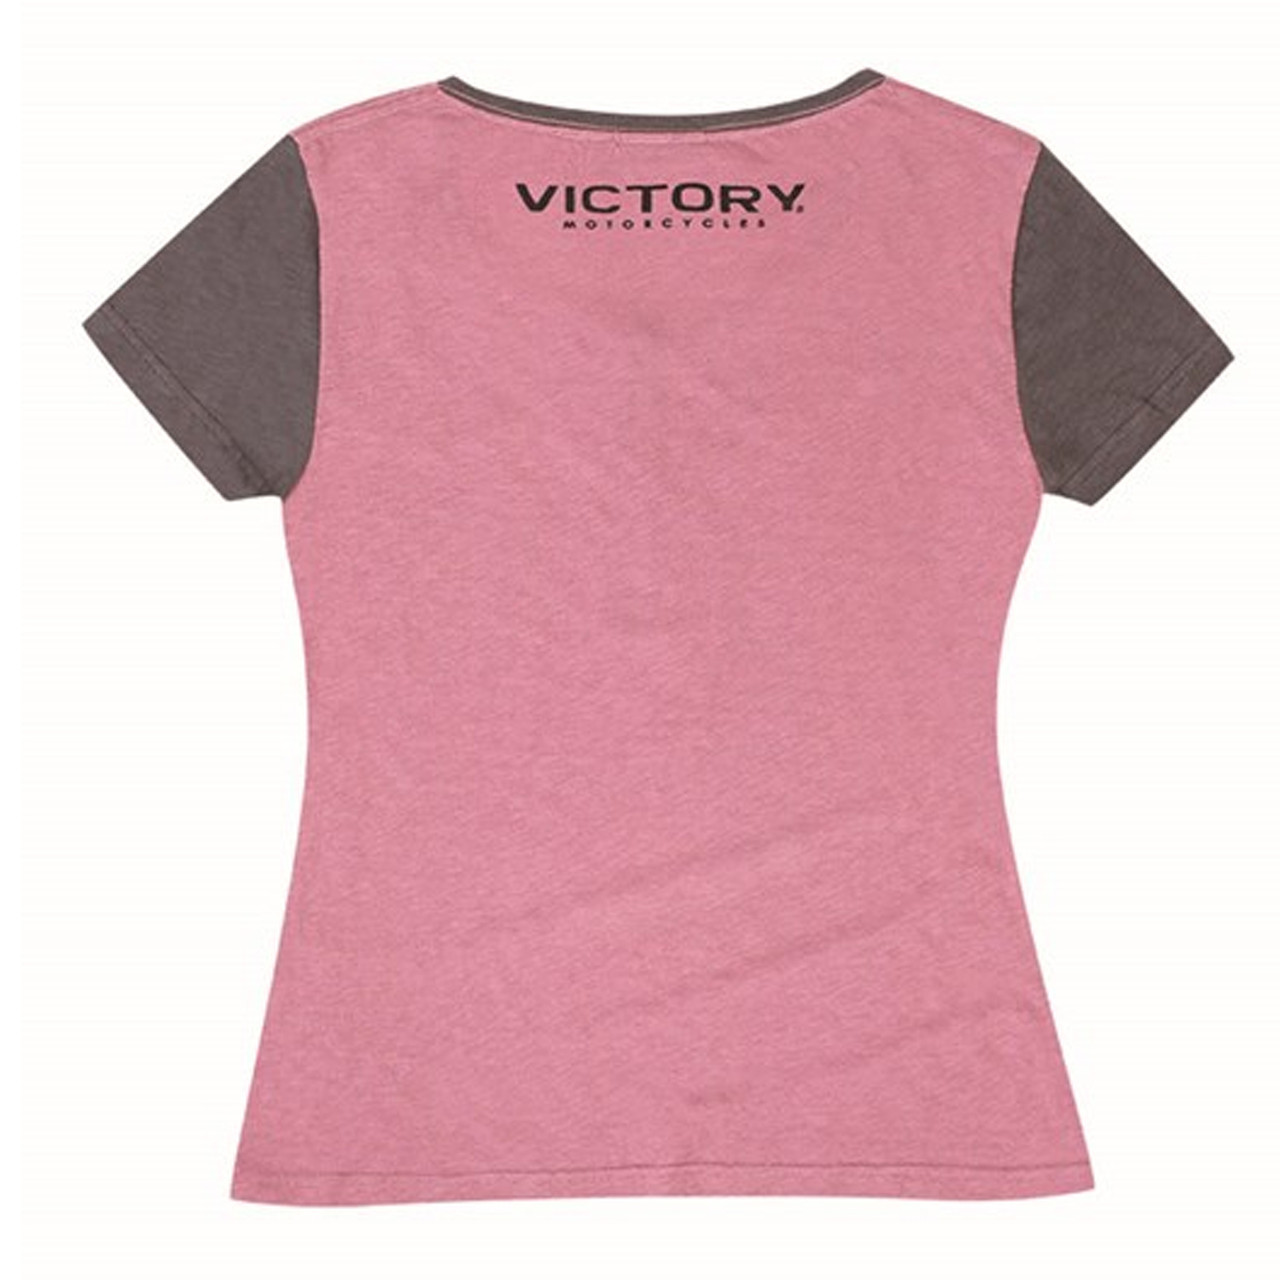 Victory Motorcycle New OEM Women's Pink Henley Tee Shirt, X-Large, 286799009